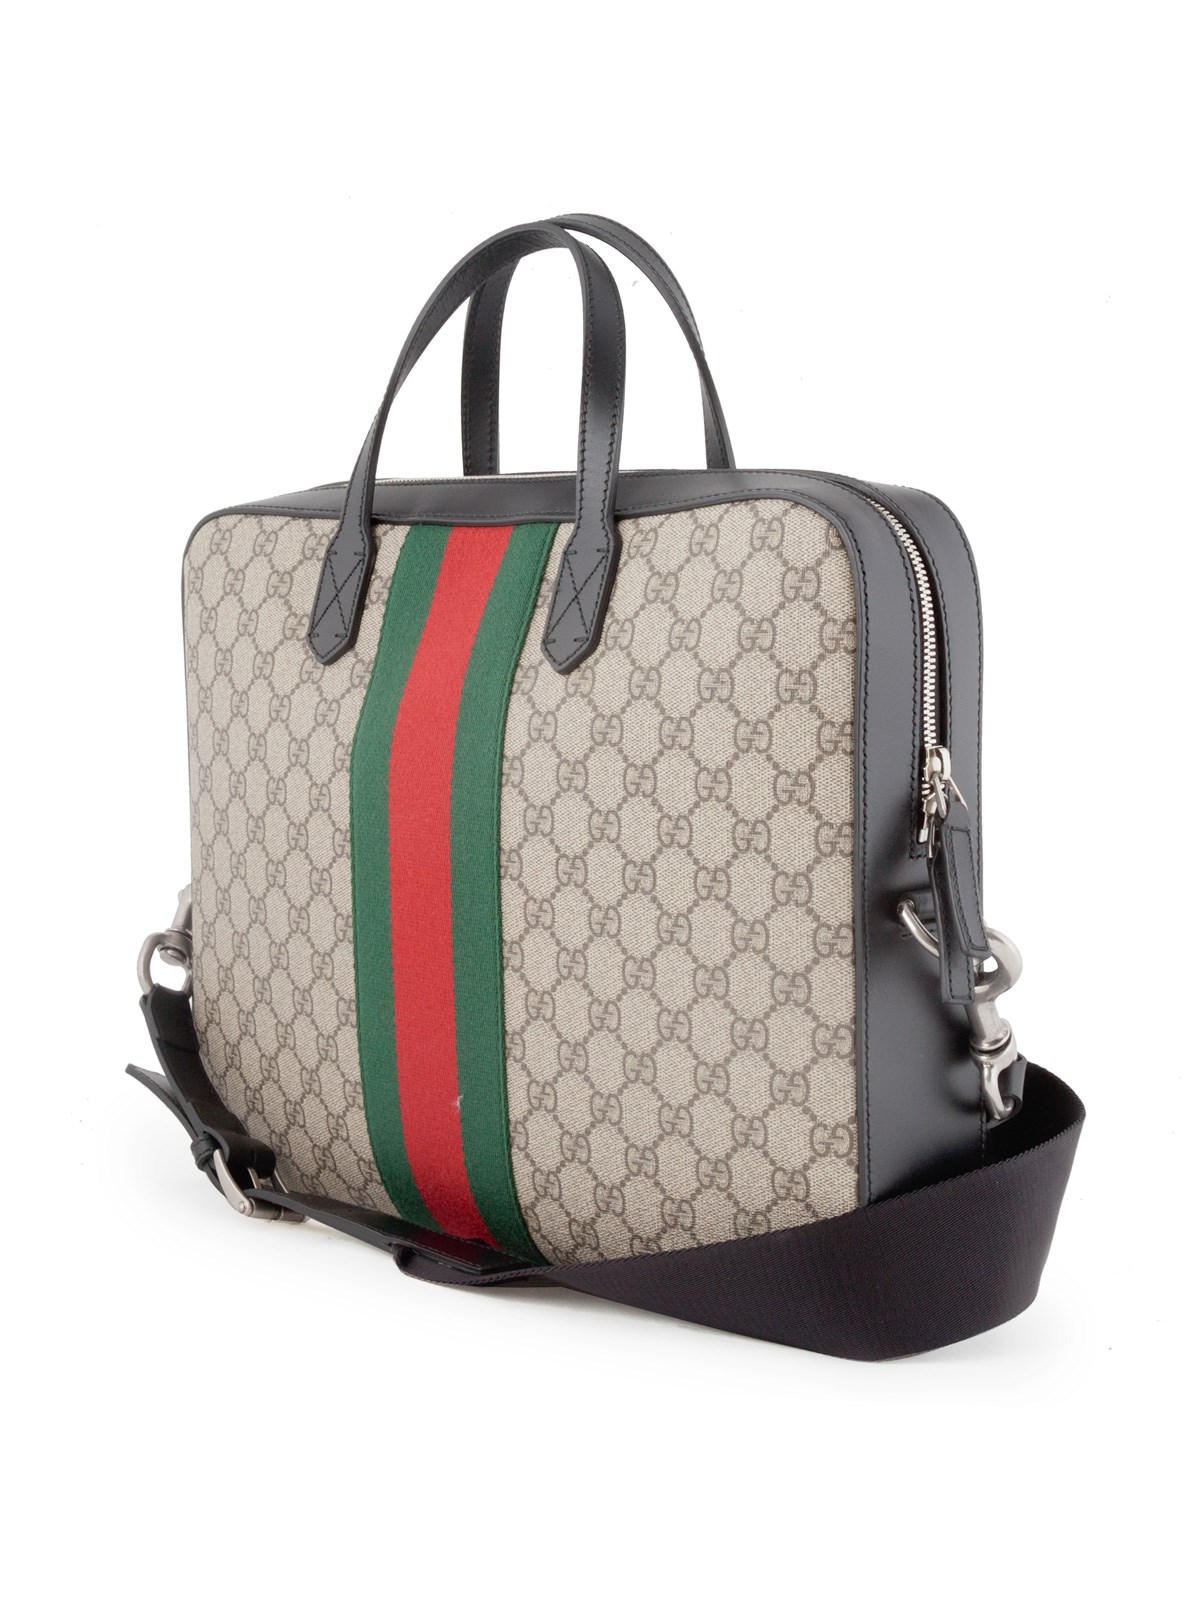 gucci WEB GG LAPTOP BAG available on www.bagssaleusa.com/product-category/neonoe-bag/ - 20856